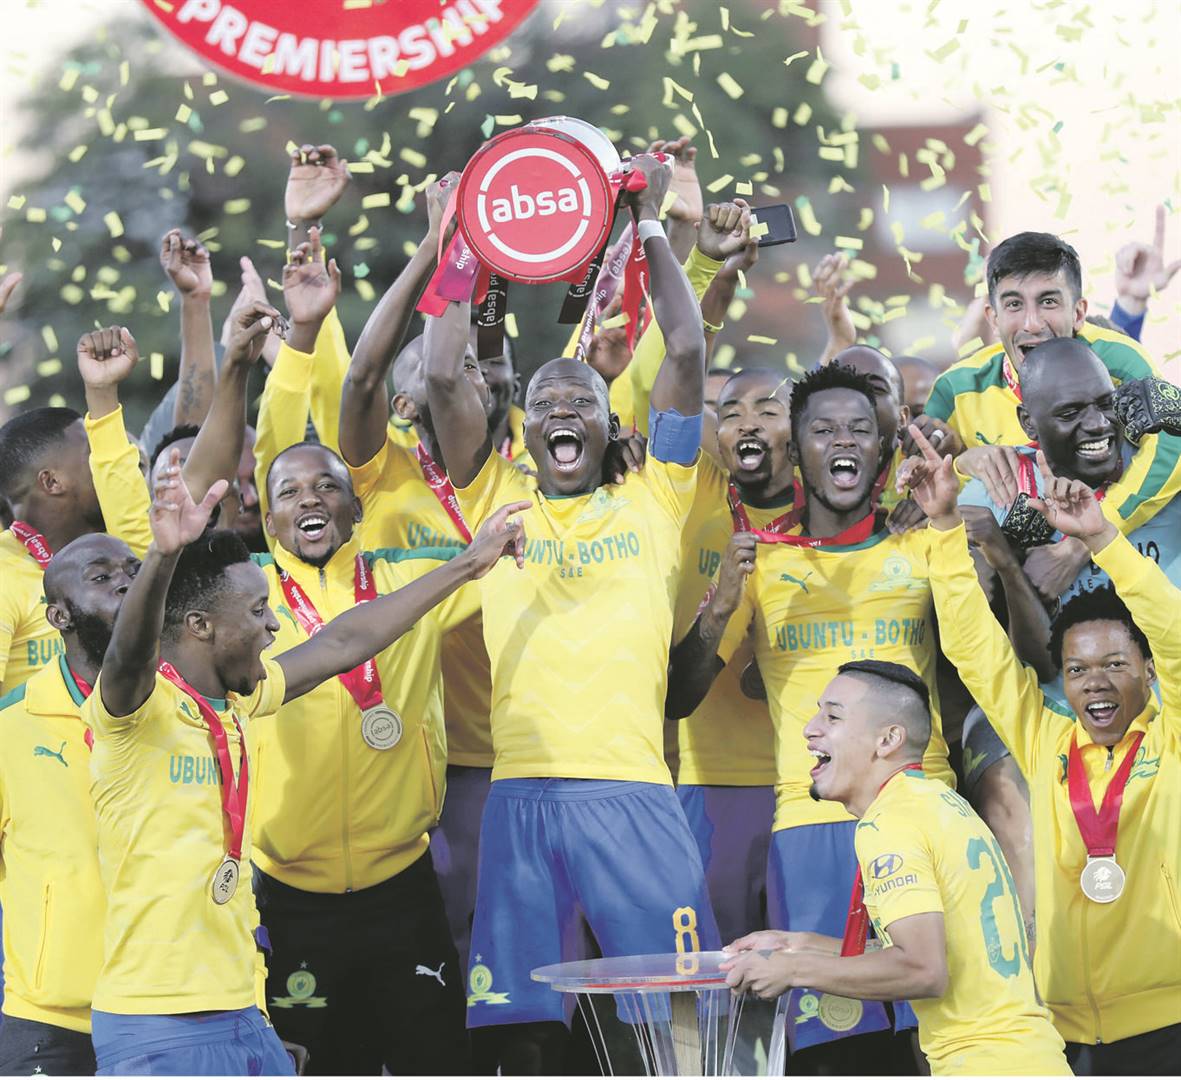 ECSTASY Mamelodi Sundowns celebrate winning the Absa Premiership 2018/19 title after beating Free State Stars 1-0 at Goble Park Stadium in Bethlehem yesterday. Picture: Samuel Shivambu / BackpagePix